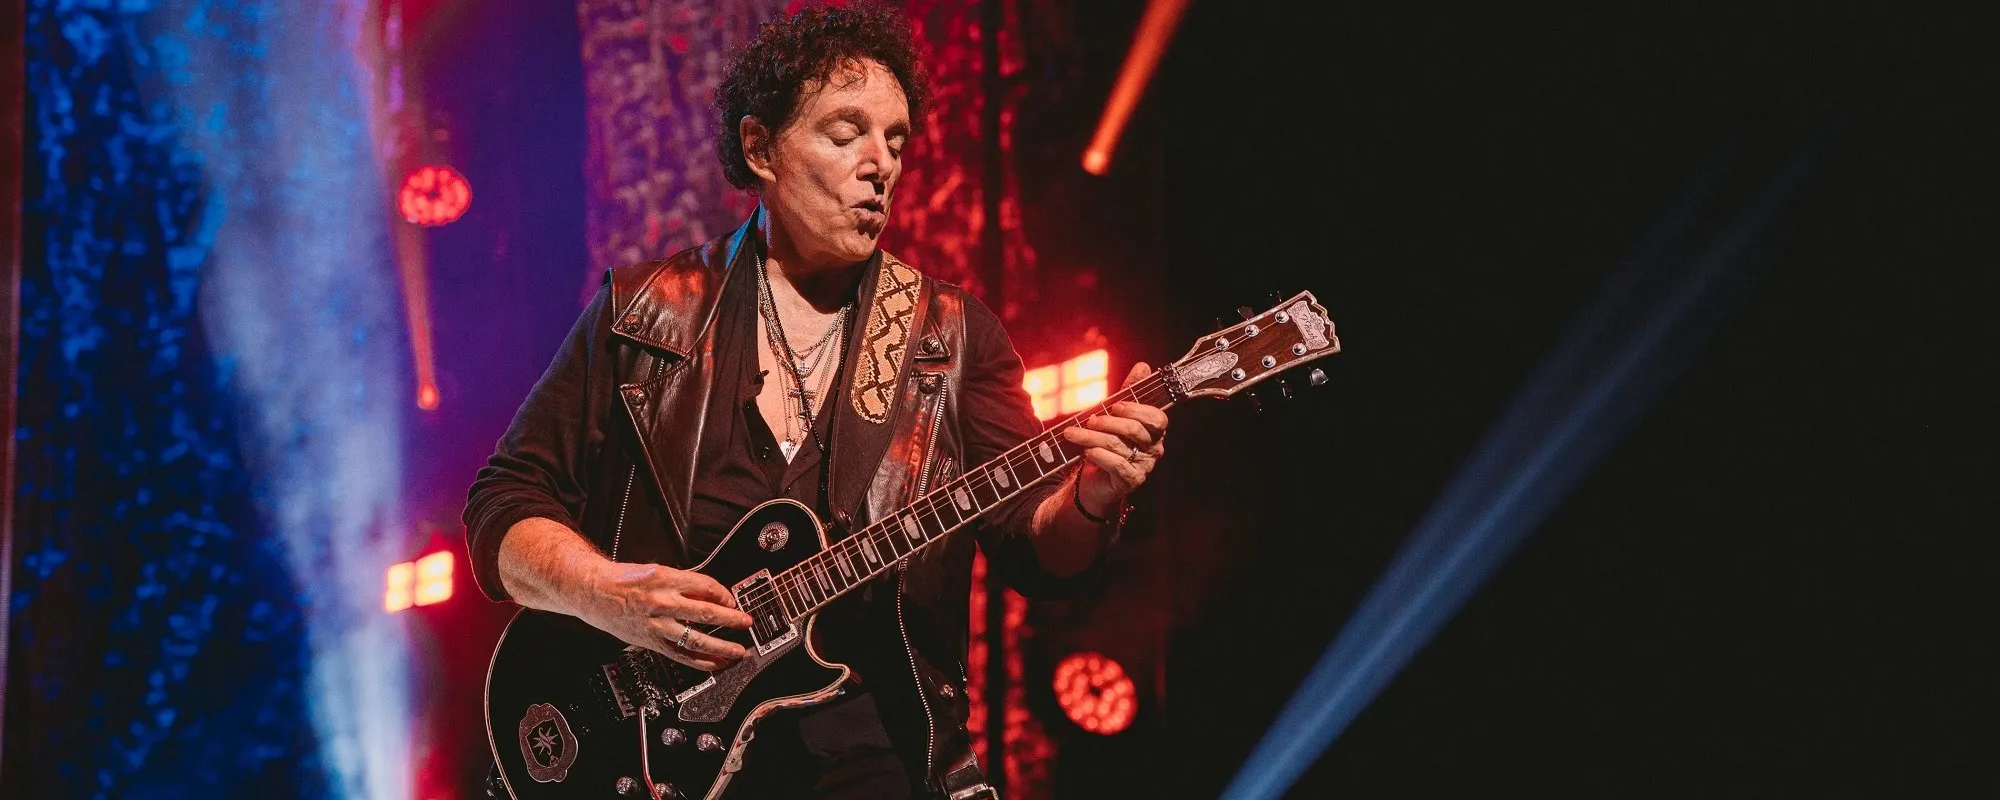 Happy 70th Birthday Neal Schon: 5 Highlights from the Guitar Great’s Career with Journey